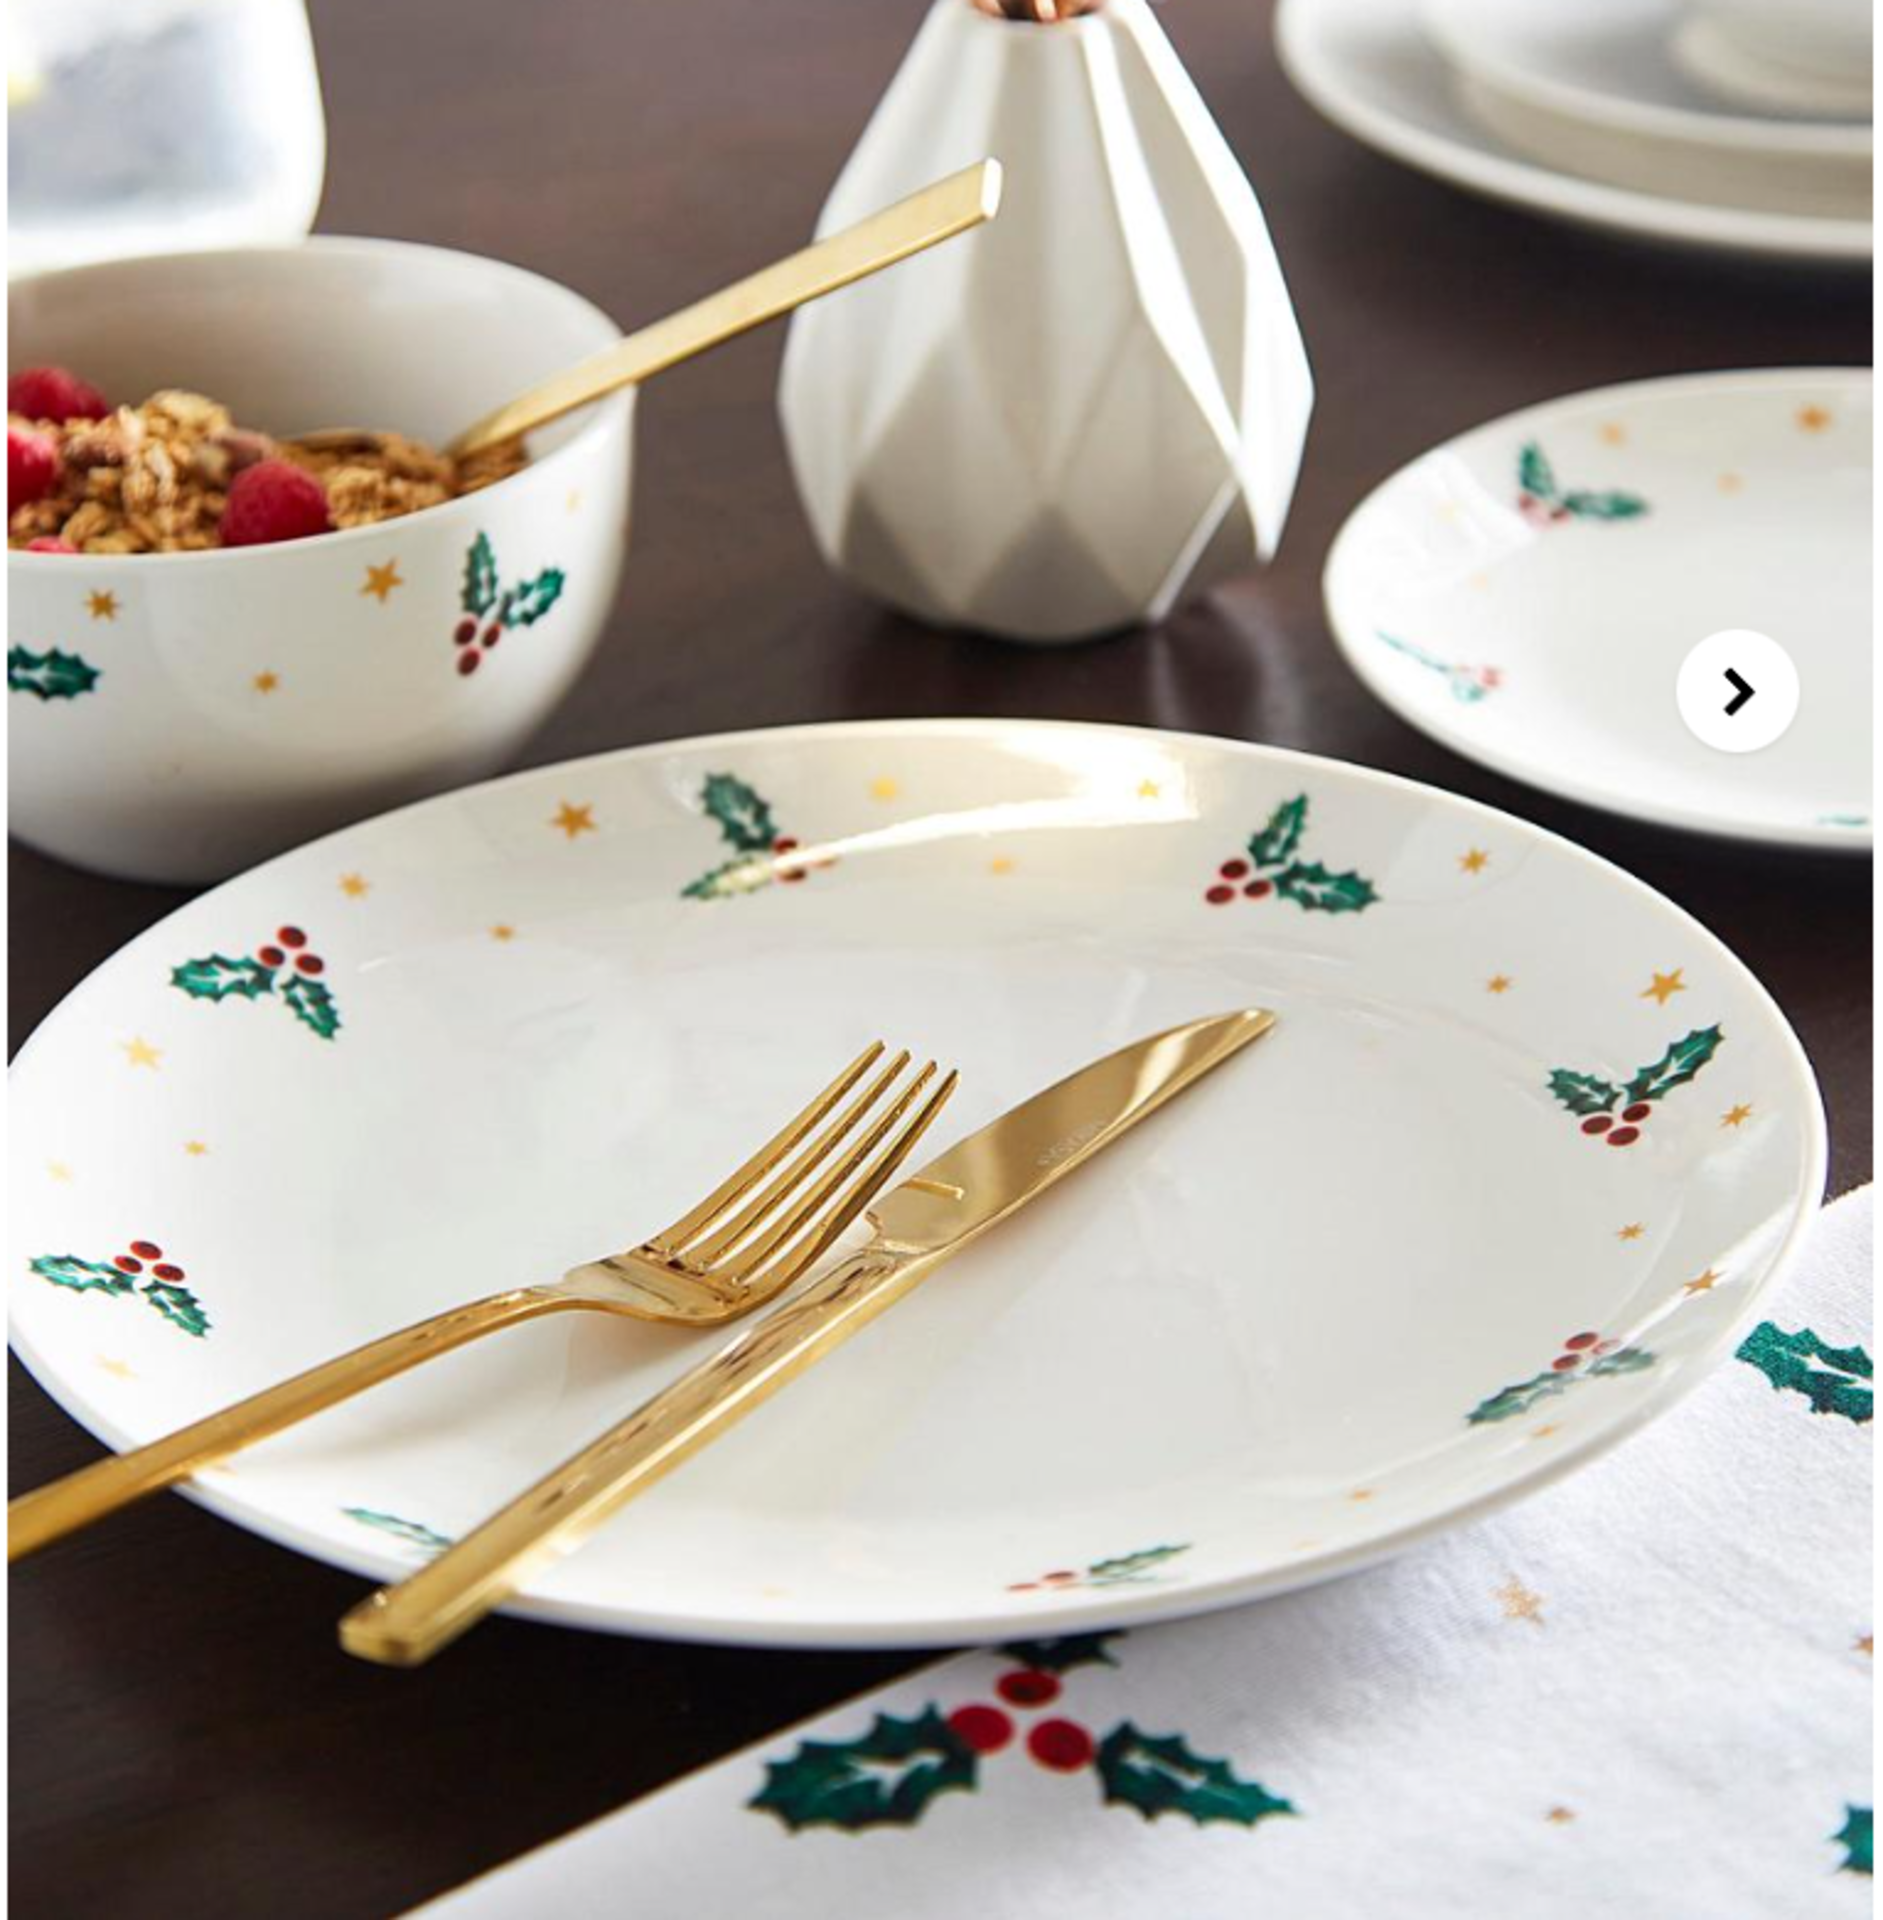 Holly and Stars 12 Piece Dinner Set. - SR30. RRP £60.00. 12 piece dinner set with a green holly